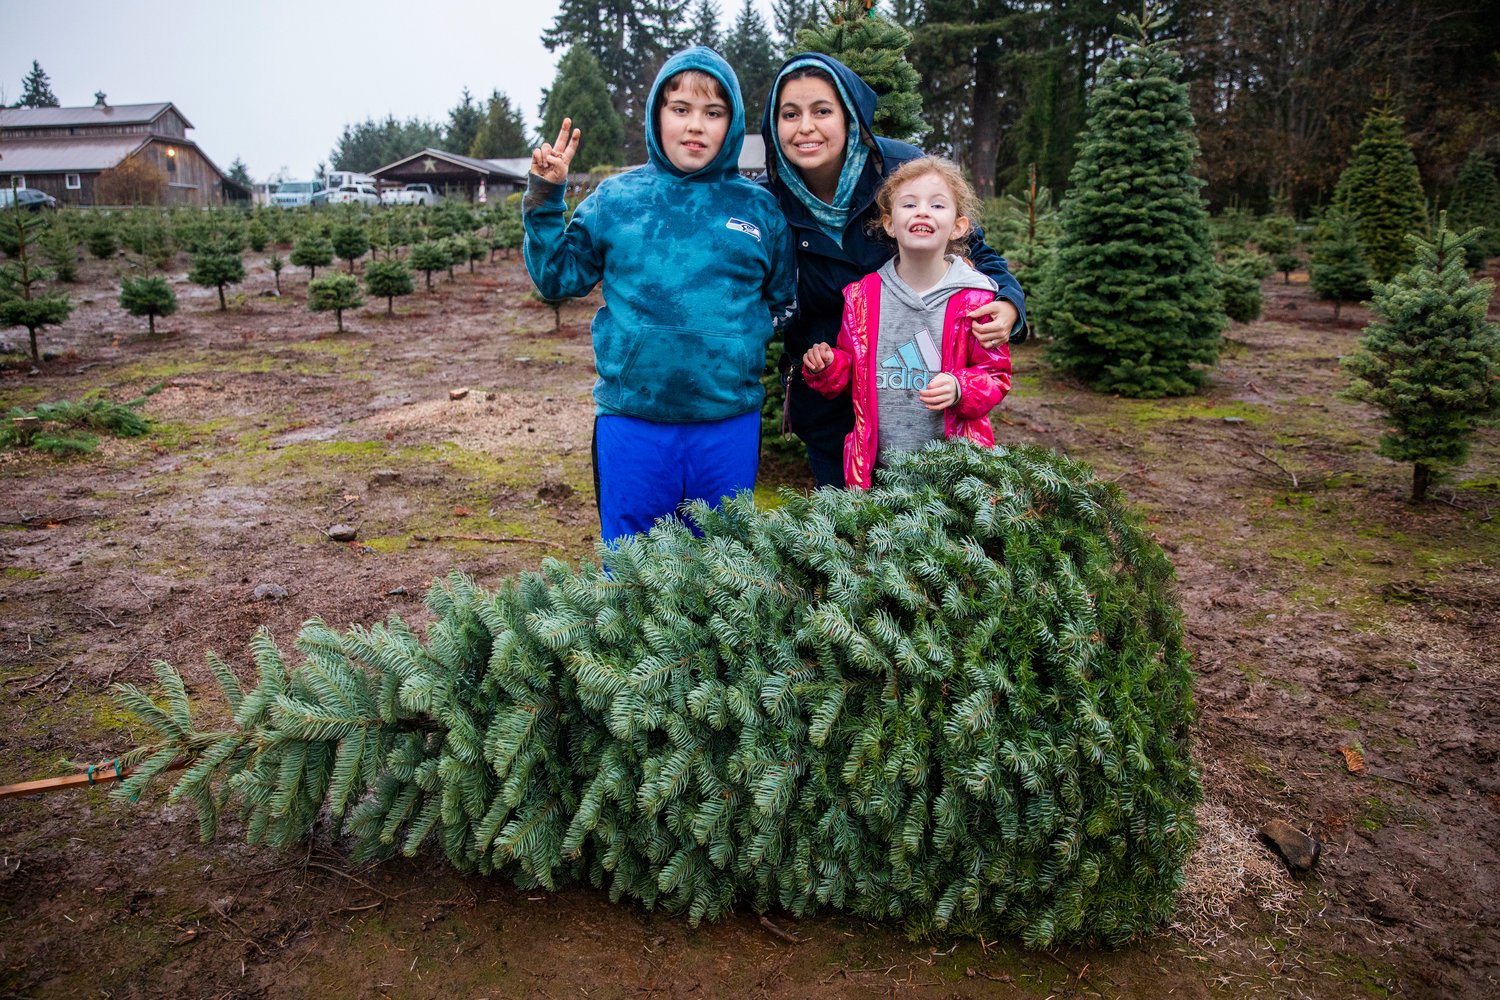 Andrea Shaw poses for a photo with Dakota, 9, and Khloe, 7, after finding a tree at the Mistletoe Tree Farm west of Chehalis on Friday.